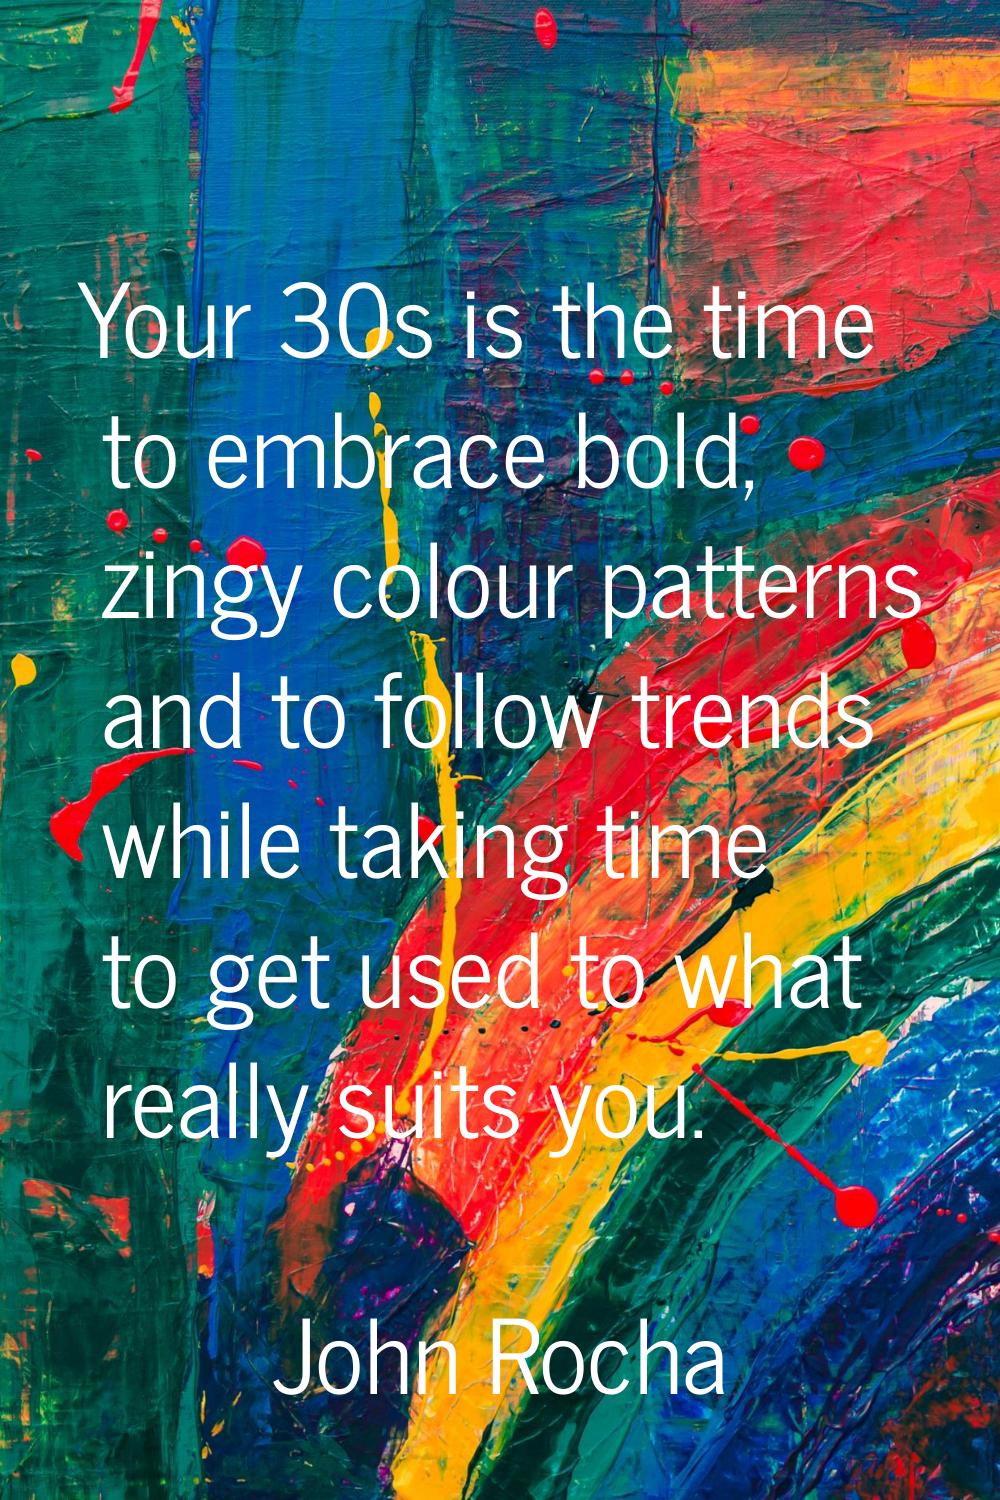 Your 30s is the time to embrace bold, zingy colour patterns and to follow trends while taking time 